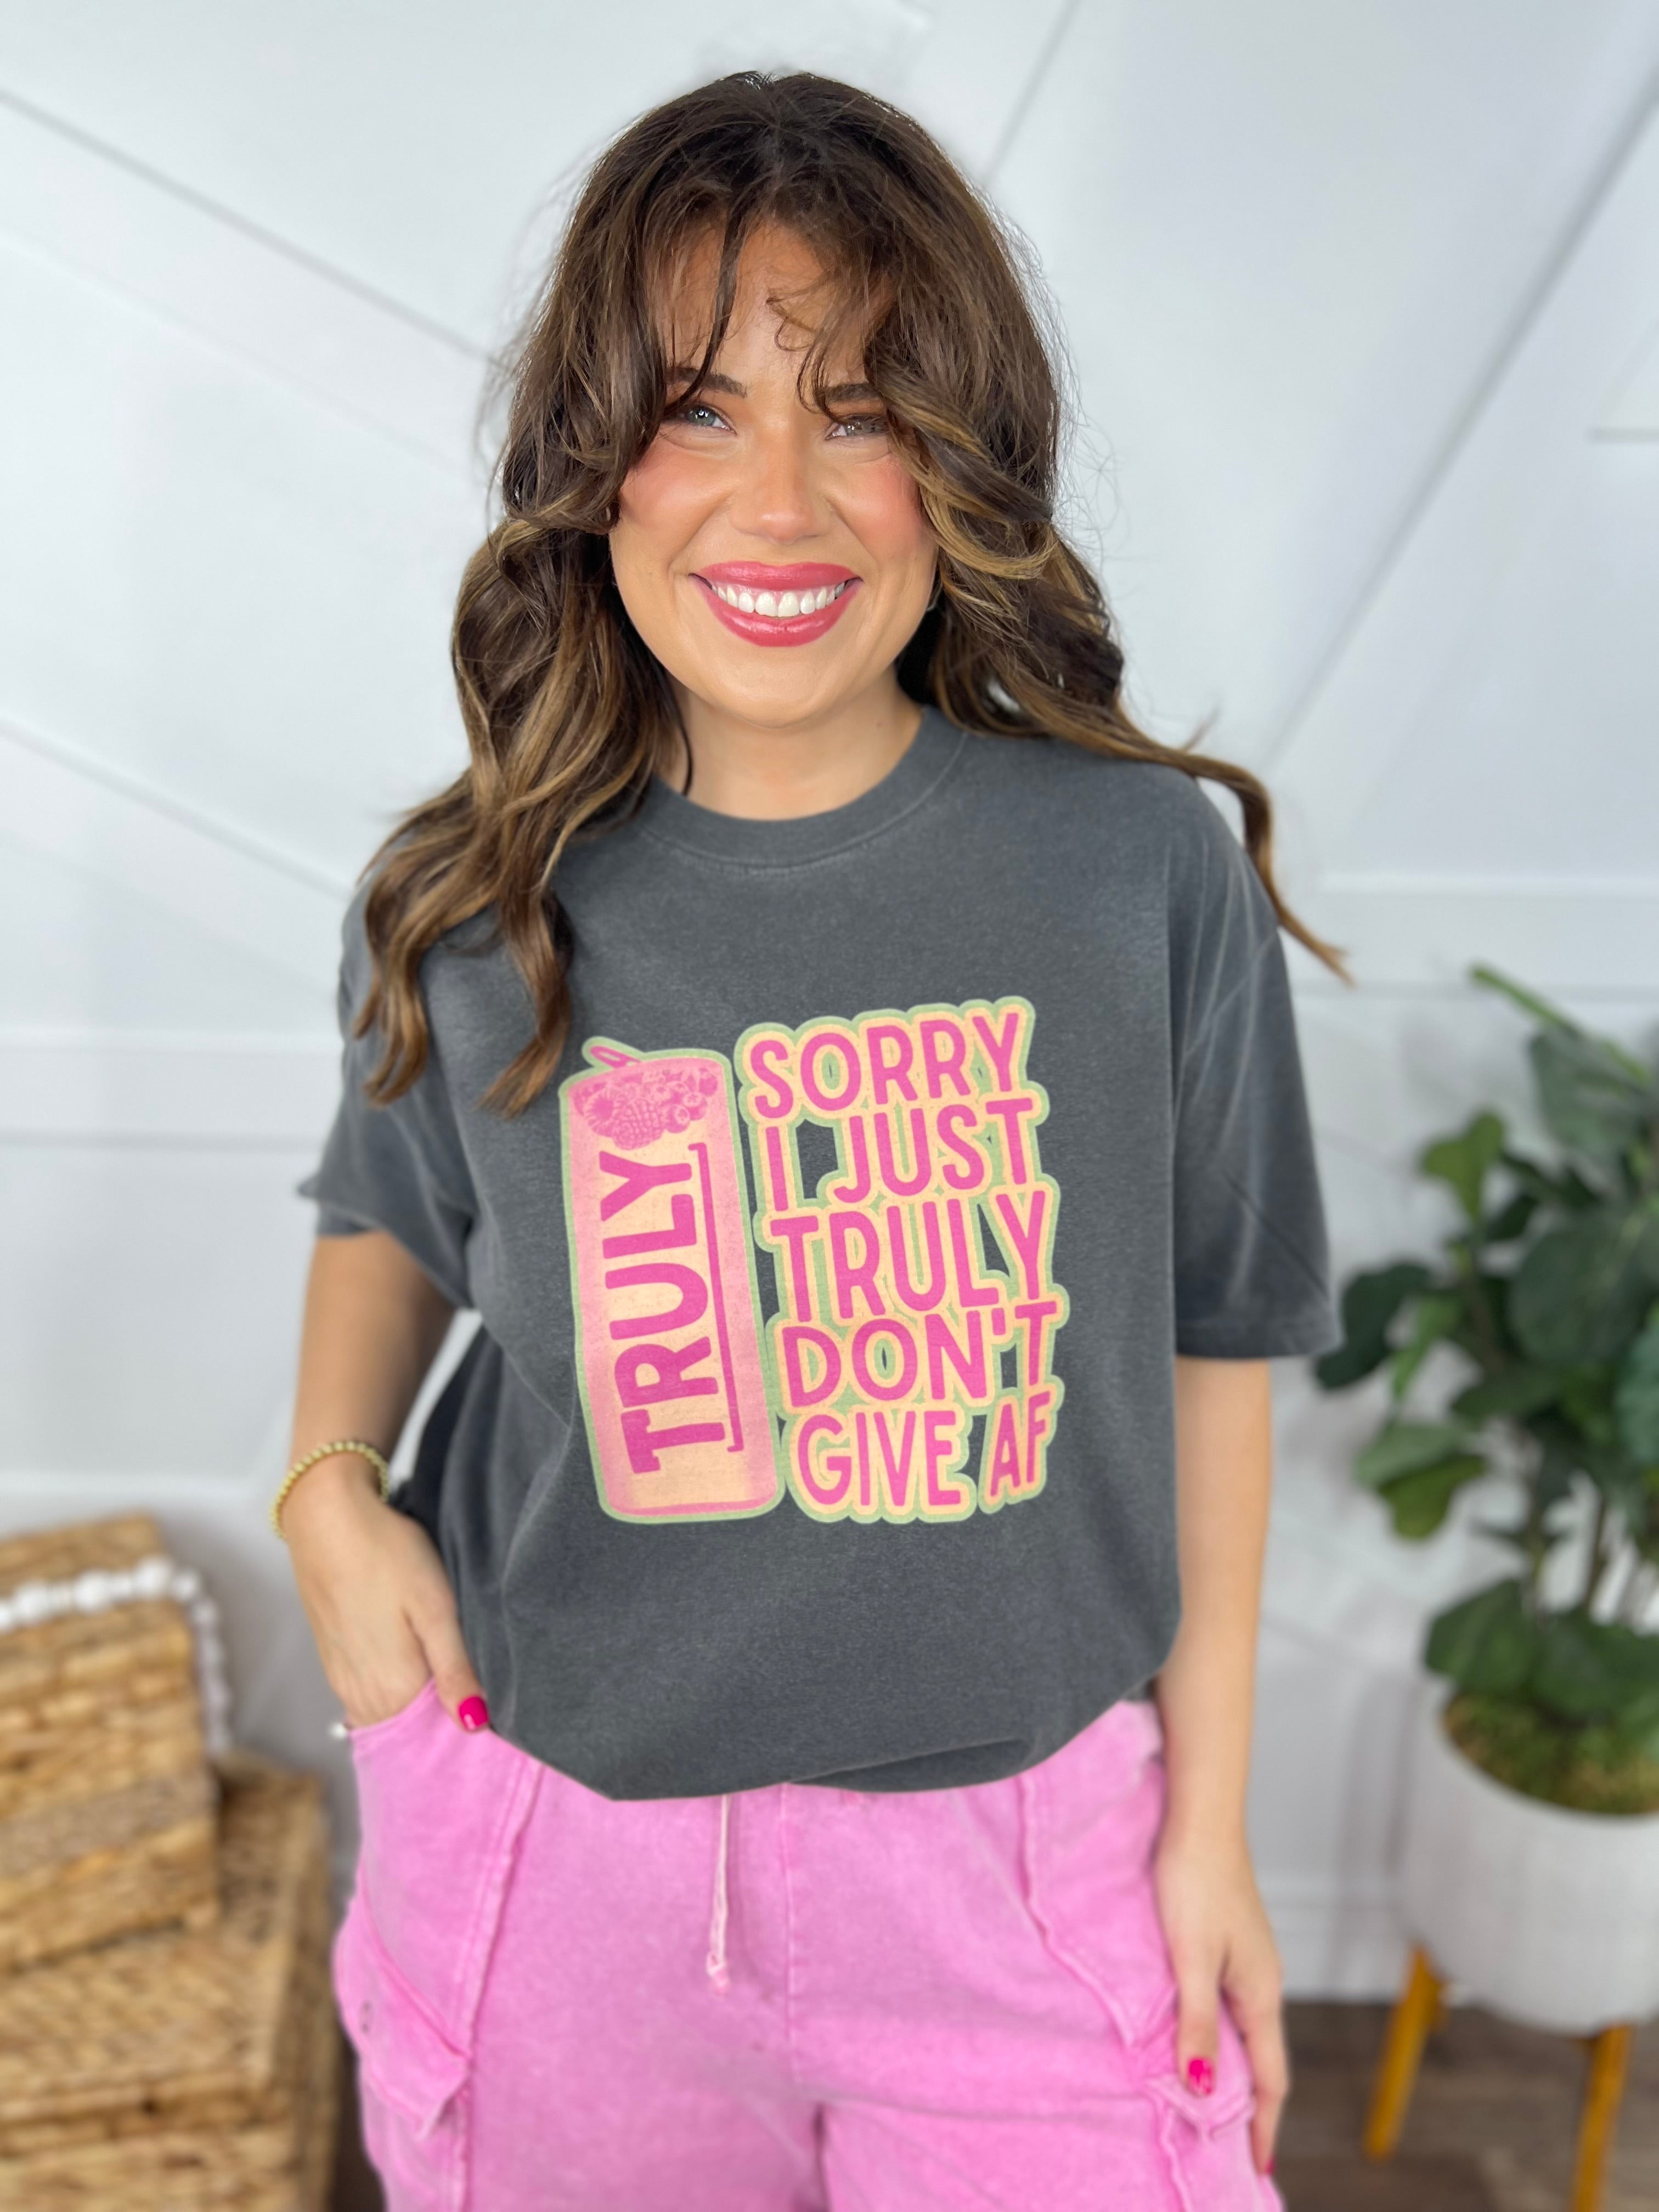 Truely Don't Graphic Tee-130 Graphic Tees-Heathered Boho-Heathered Boho Boutique, Women's Fashion and Accessories in Palmetto, FL